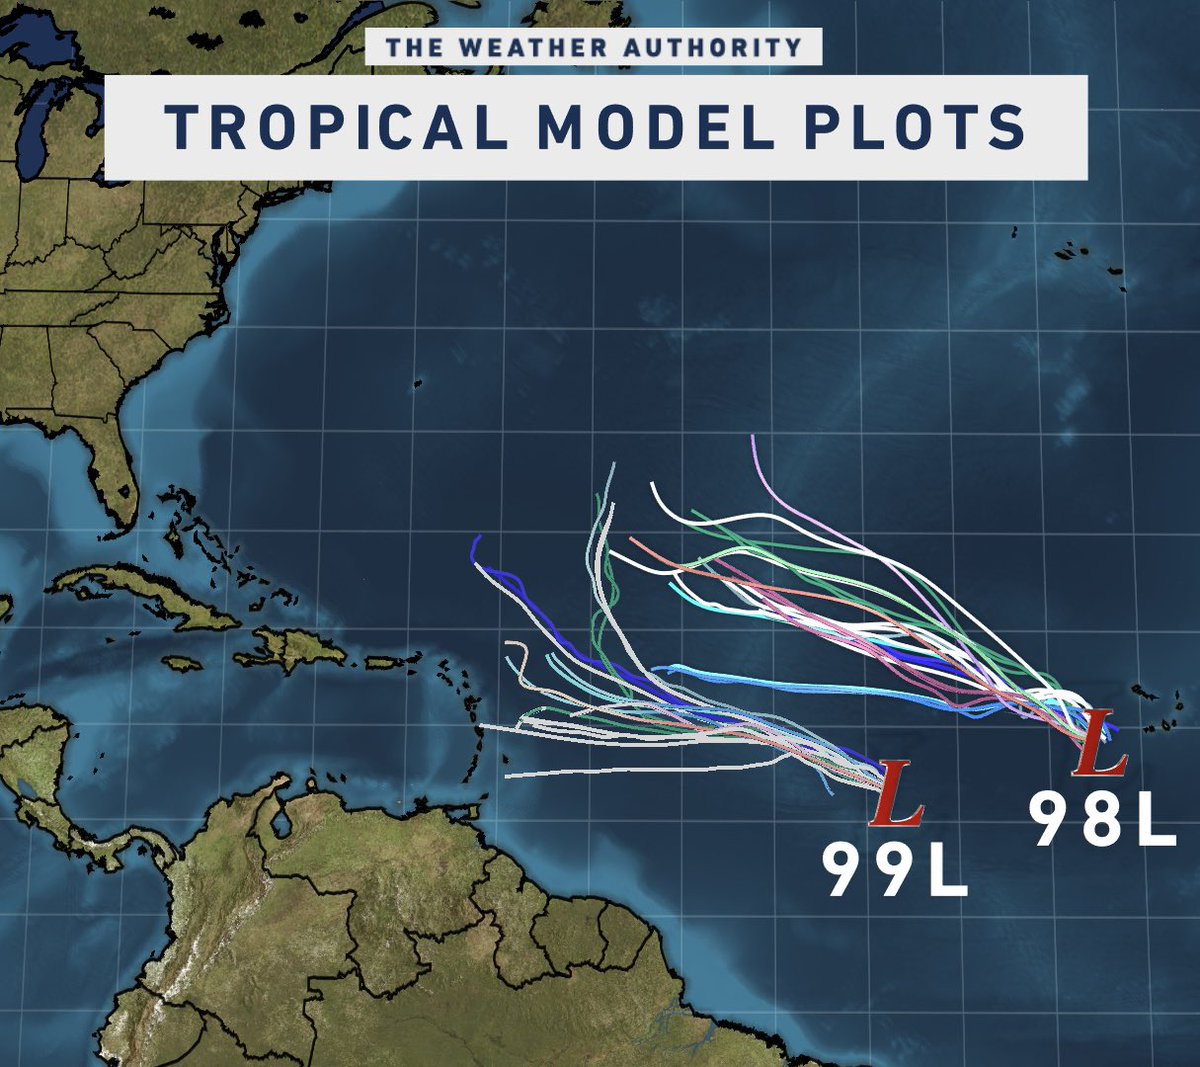 Latest model plots for Invest 98L & Invest 99L Each will be moving into a more favorable environment for development over the next several days. Our next names up would be #Emily and #Franklin.